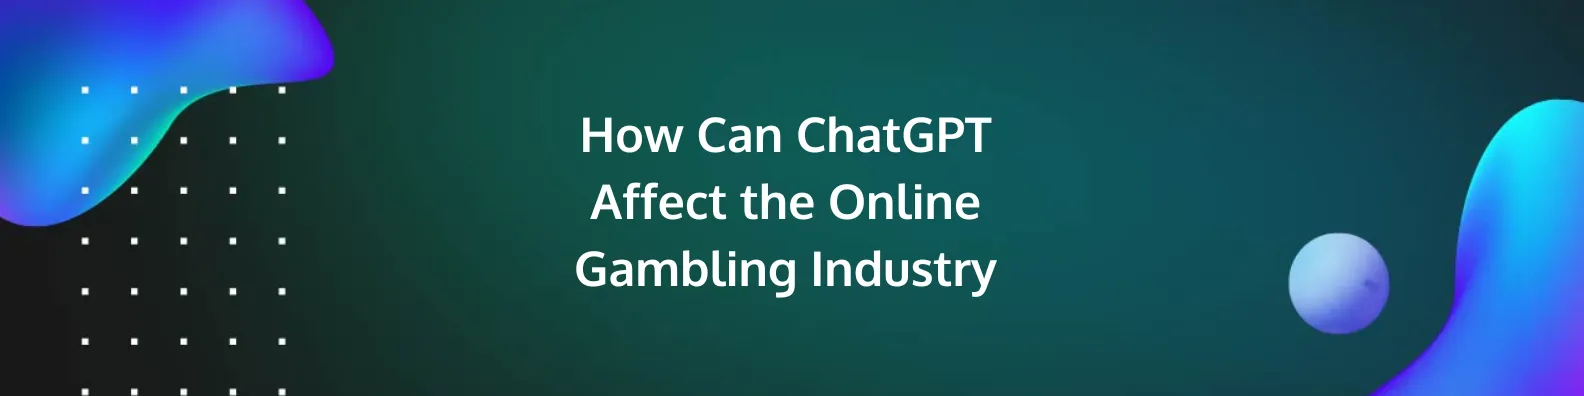 How Can ChatGPT Affect the Online Gambling Industry The online gambling industry never stands still, and ChatGPT's cutting-edge abilities hold the promise of leaving a lasting impact on this dynamic domain. With technology's relentless march forward, and new casino payment method releases, this AI software has the potential to transform numerous facets of the industry, improving user experiences and streamlining operations in the process. In the upcoming sections, we'll delve into the exciting possibilities ChatGPT presents as it shapes the future of online gambling, opening up fresh opportunities for operators and players to thrive and flourish. #1 Creating New Casino Games One possible way this AI chatbot might revolutionise the sector is by aiding in the development of innovative and captivating casino games. Game designers could tap into ChatGPT's remarkable abilities to decipher complex patterns and inspire unique ideas, ultimately using this AI resource to develop groundbreaking concepts, themes, and game mechanics that redefine the casino gaming landscape. #2 Enhancing Customer Service Capabilities ChatGPT could be a valuable asset in enhancing customer support by taking over repetitive tasks and addressing routine queries, thus allowing support staff to focus on more critical and sensitive aspects of their role. This approach frees human representatives to devote their time and energy to responsible gambling, dispute resolution, personalised customer care, and VIP services. Consequently, this collaboration between AI and human expertise could lead to increased efficiency, cost savings, and improved customer satisfaction, all while fostering professional growth for support team members. #3 Detecting Fraudulent Activity ChatGPT's sophisticated data analysis abilities can be harnessed to pinpoint suspicious activities and potential fraud, creating a more secure gambling environment for players. By continuously monitoring player behaviour and transactions, the AI system can identify unusual patterns and trigger alerts for further investigation. This proactive approach not only helps protect casinos from financial losses but also safeguards the reputation and integrity of the industry. #4 Encouraging Responsible Gambling When trained to recognise signs of problem gambling, ChatGPT can play a vital role in promoting responsible gaming habits, preventing addiction, and cultivating a healthier gaming experience. This AI system can assess player behaviour and communication, catching warning signals like prolonged playtime, loss chasing, and erratic betting patterns. Once detected, ChatGPT can then provide targeted advice and support, including: Recommending self-exclusion periods or cooling-off times Suggesting limits on deposits, wagers, and session durations Offering information about professional help and resources for problem gamblers Sharing tips on how to maintain a healthy balance between gambling and other life activities